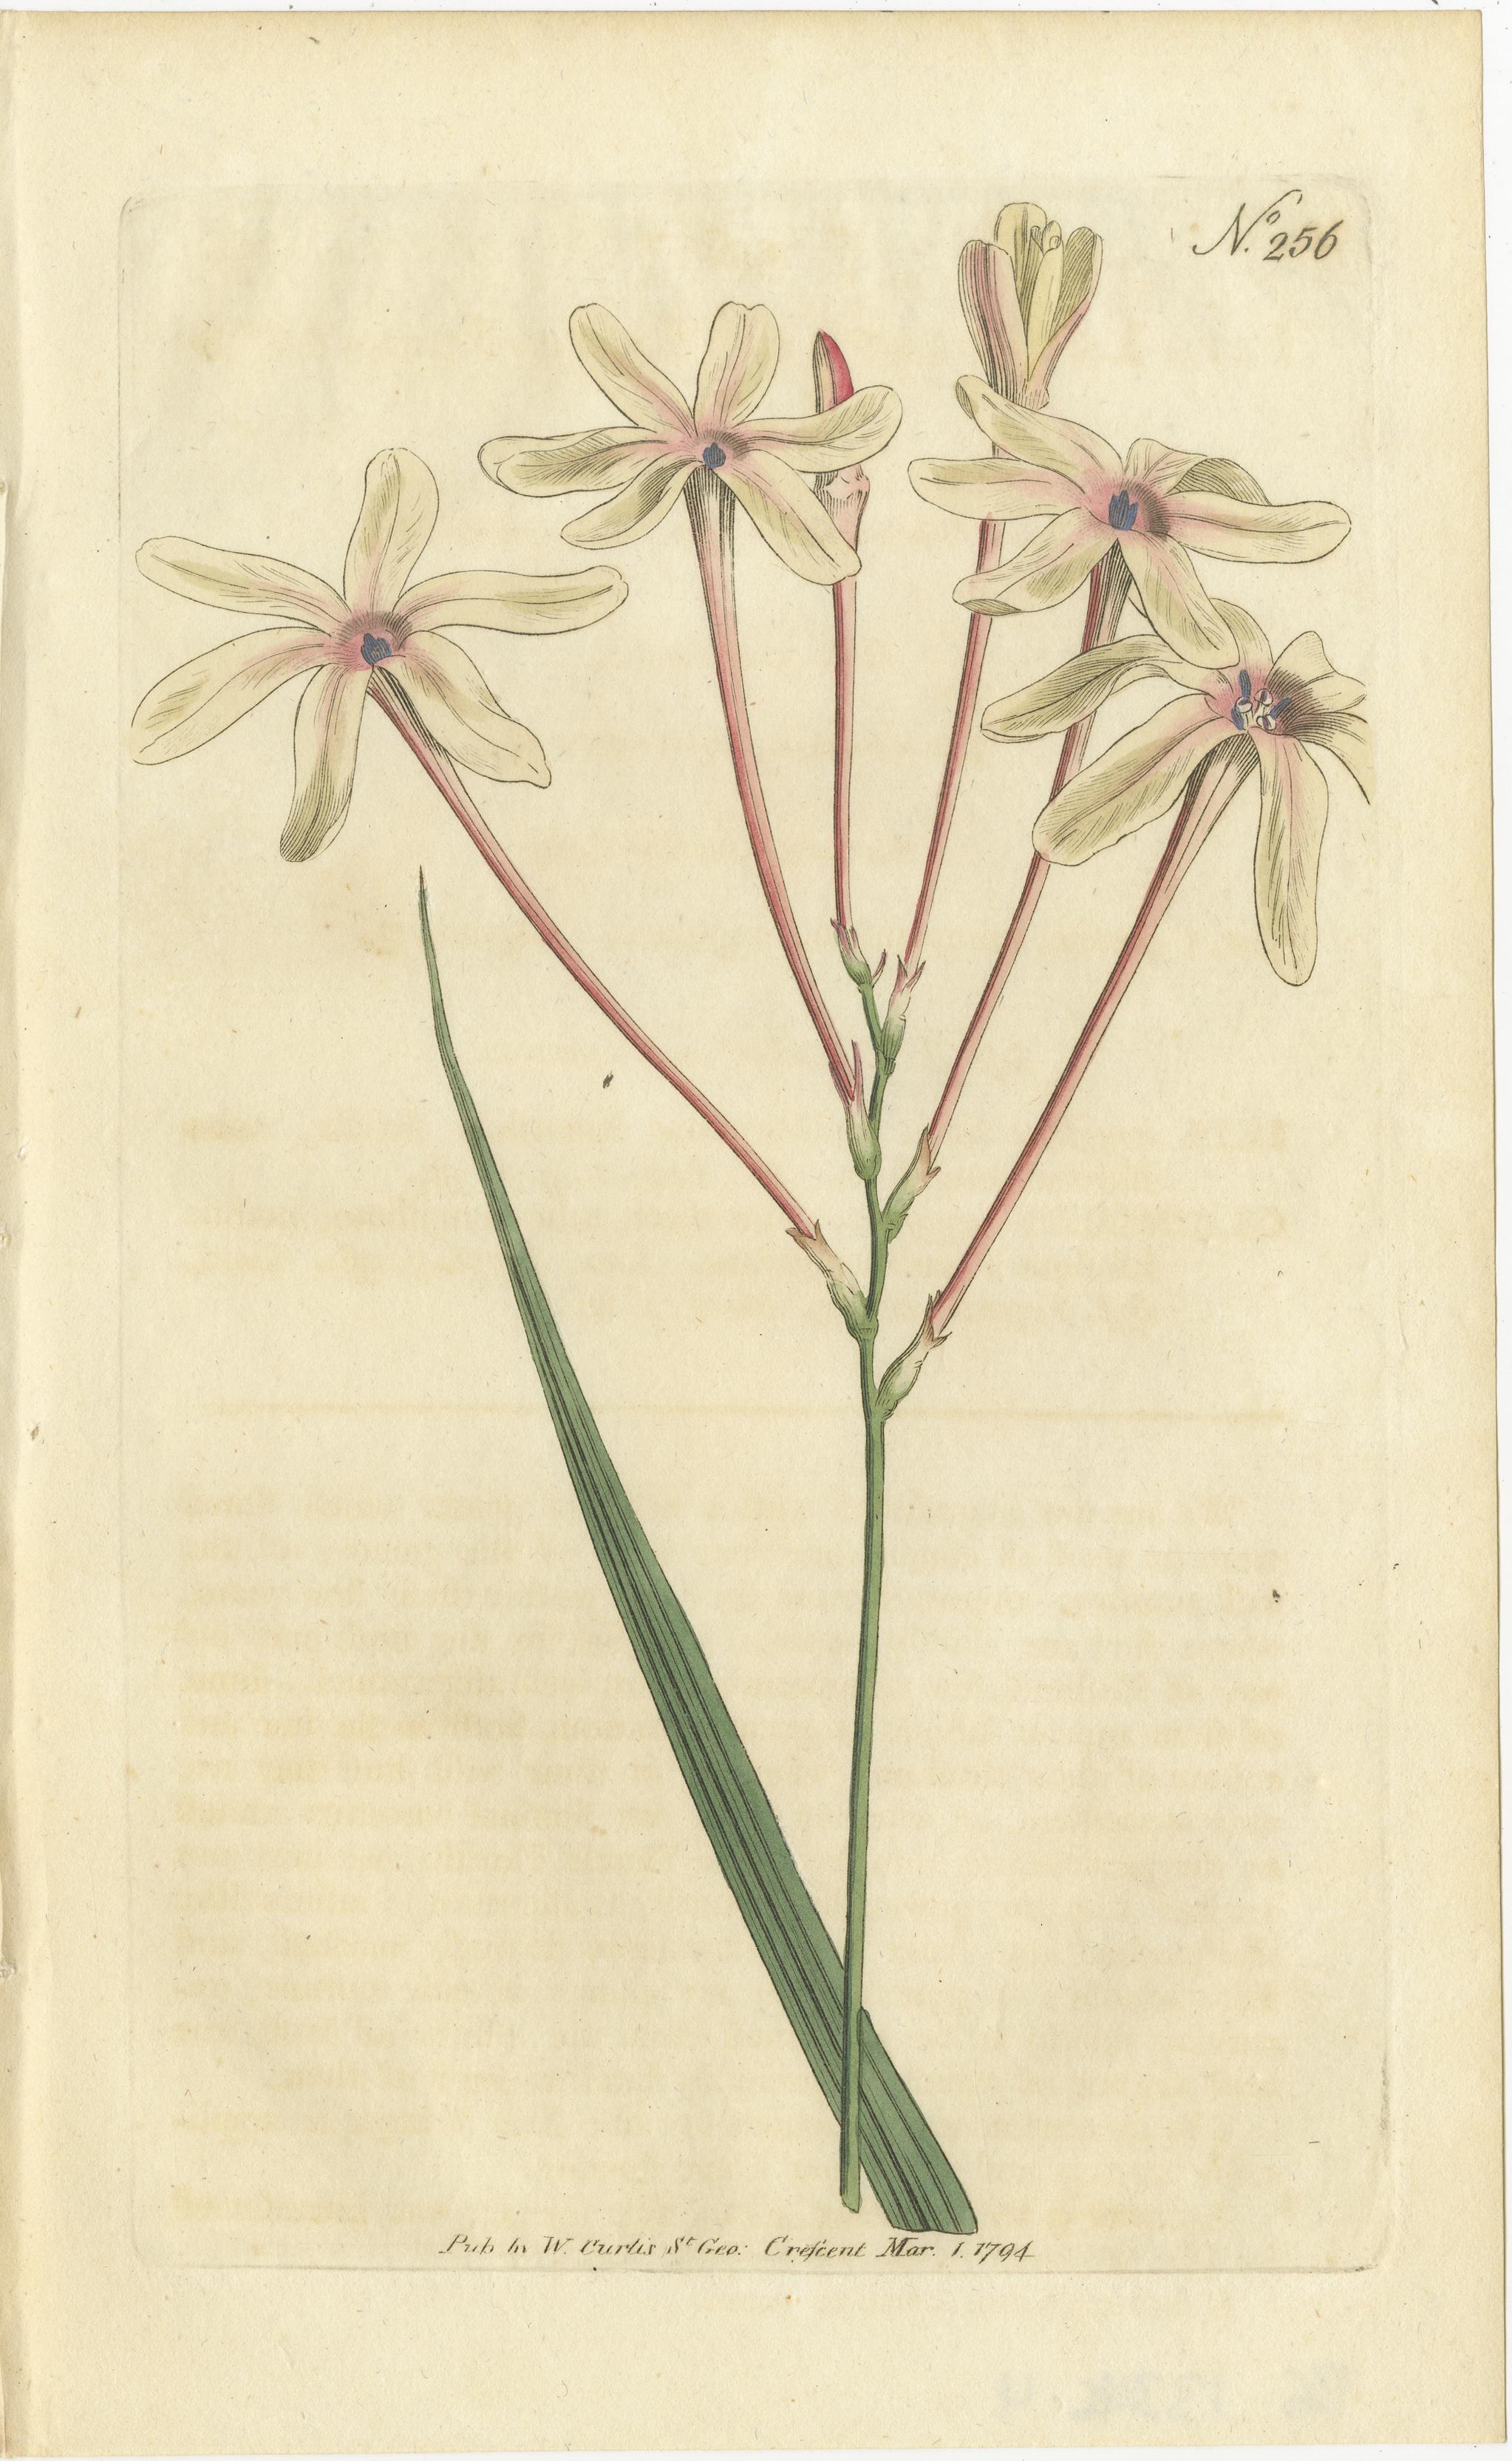 Set of 5 antique botany prints. It shows the Long-Flower'd Ixia, Plantain-Leaved Crowfoot, Neapolitan Star of Bethlehem, Square-Leaved Corn-Flag and One-Flowered Diosma. These prints originate from 'The Botanical Magazine; or Flower-Garden Displayed